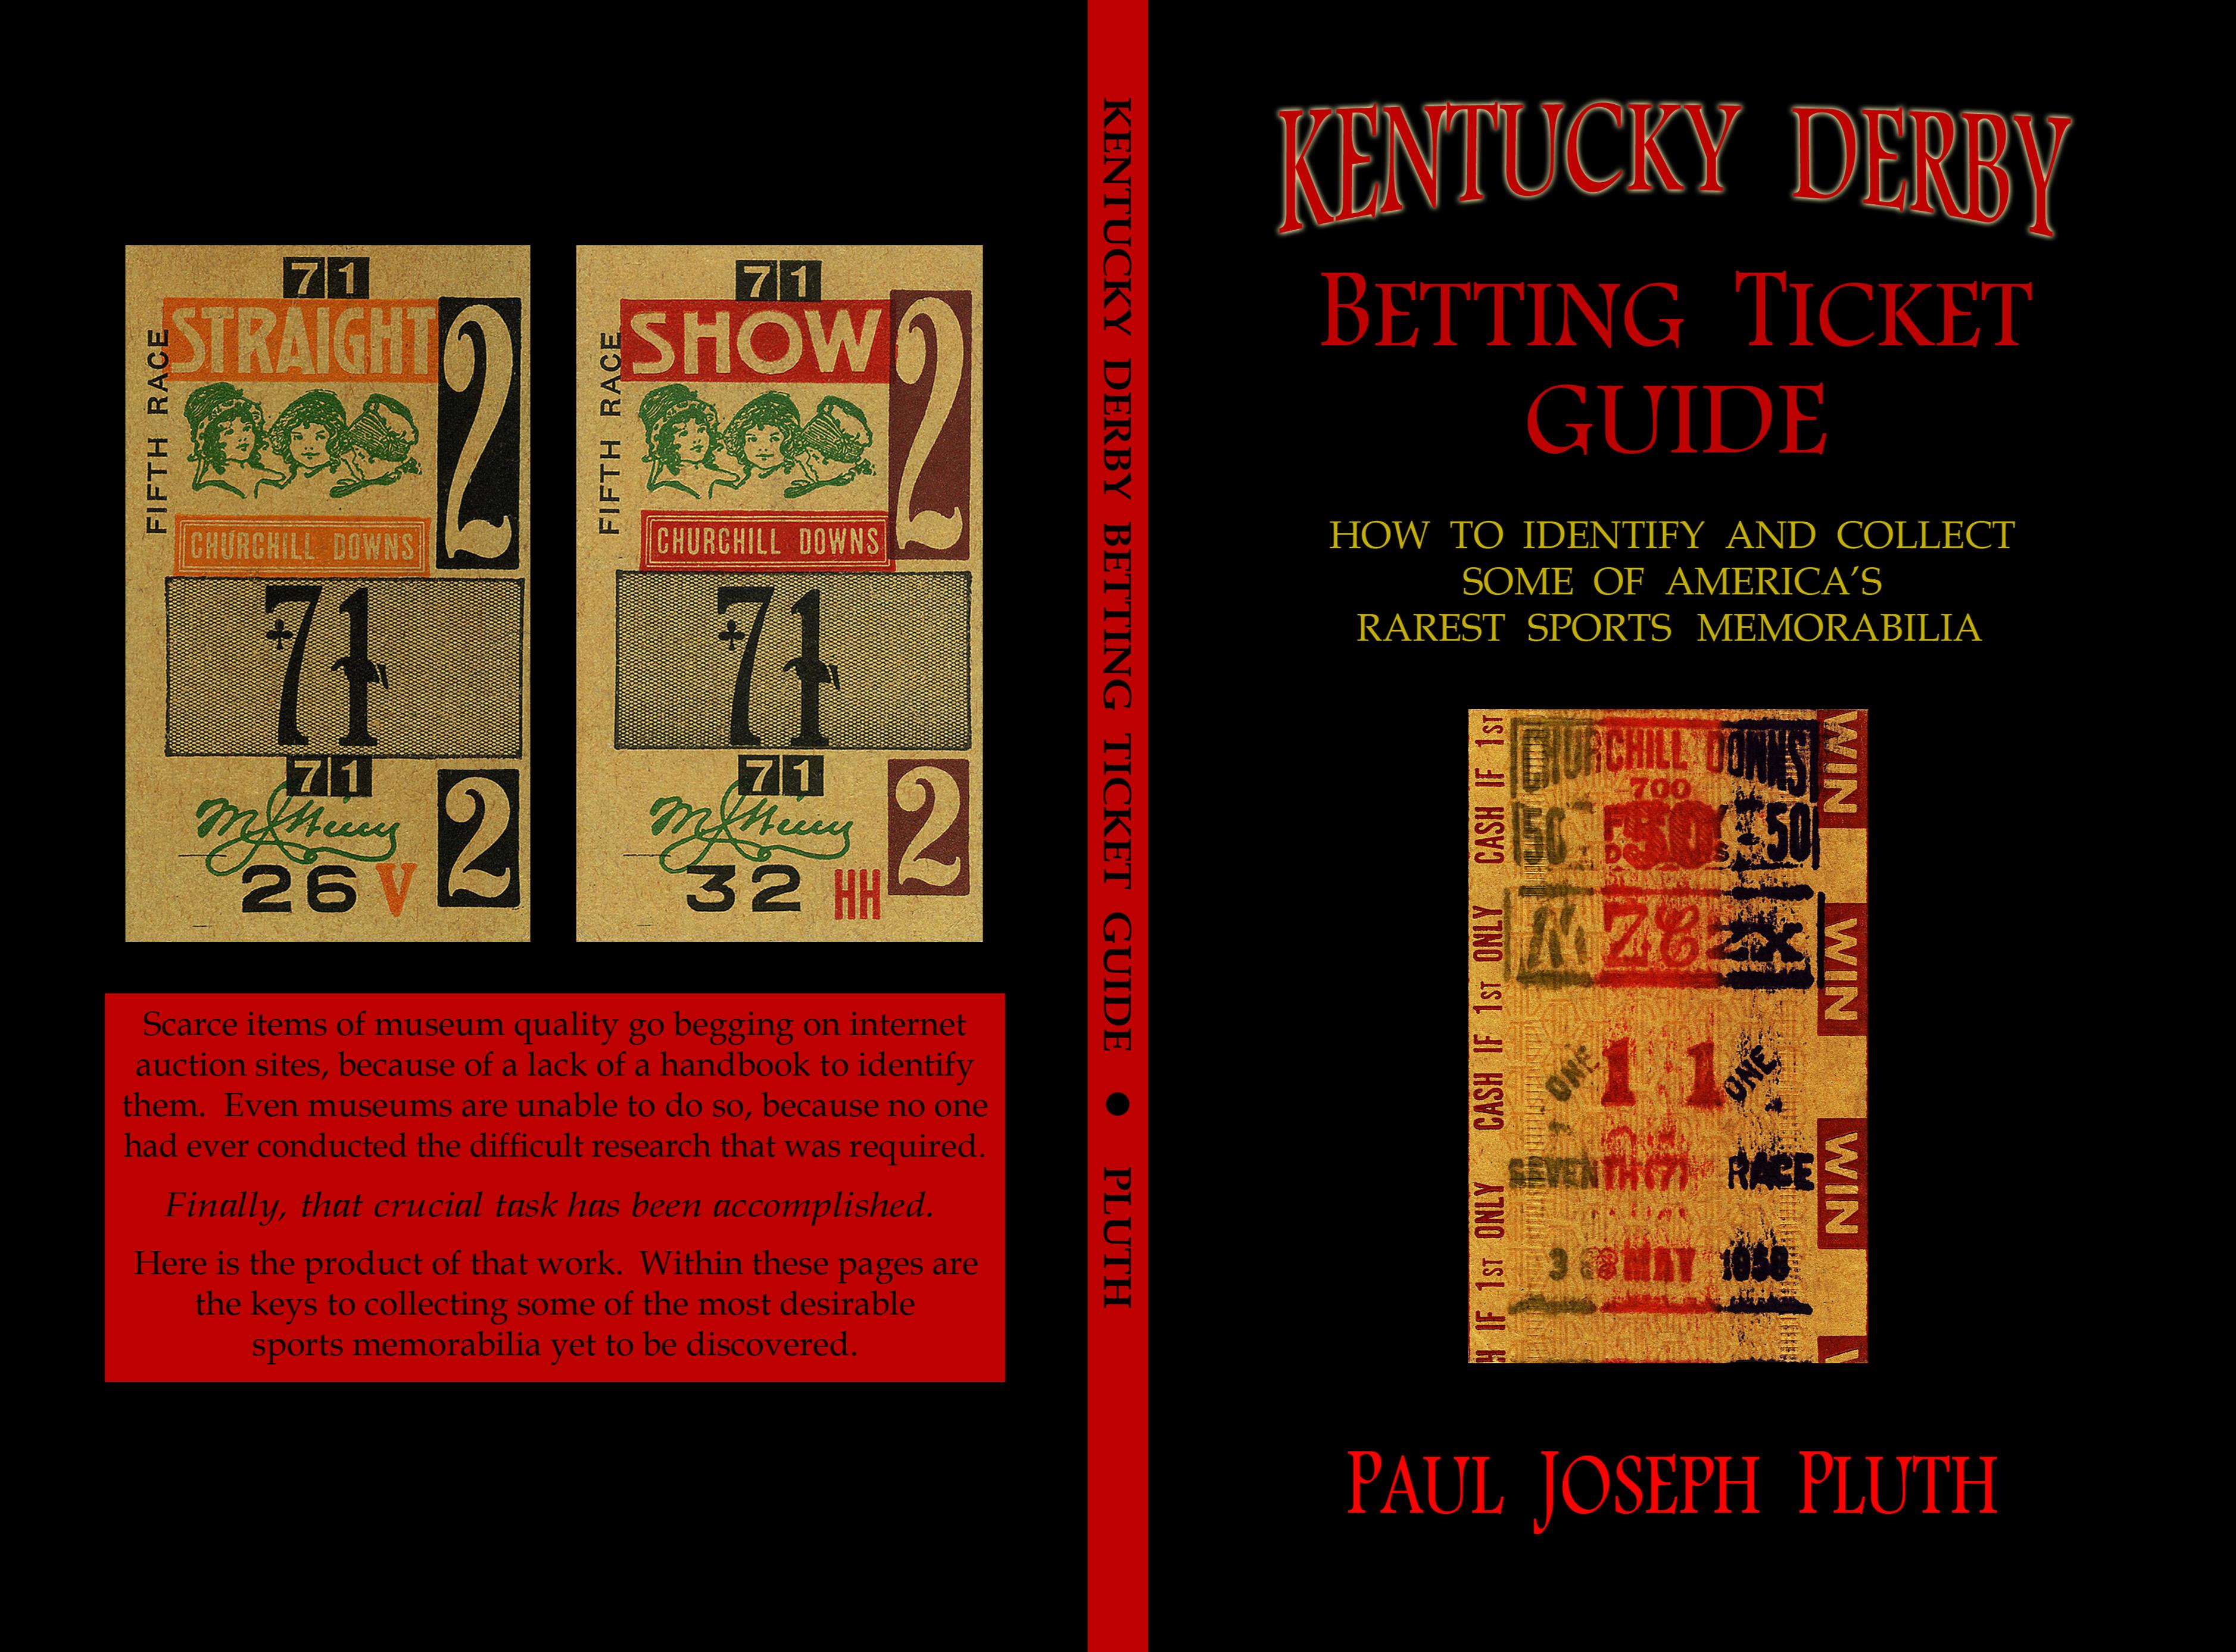 Kentucky Derby Betting Ticket Guide cover image